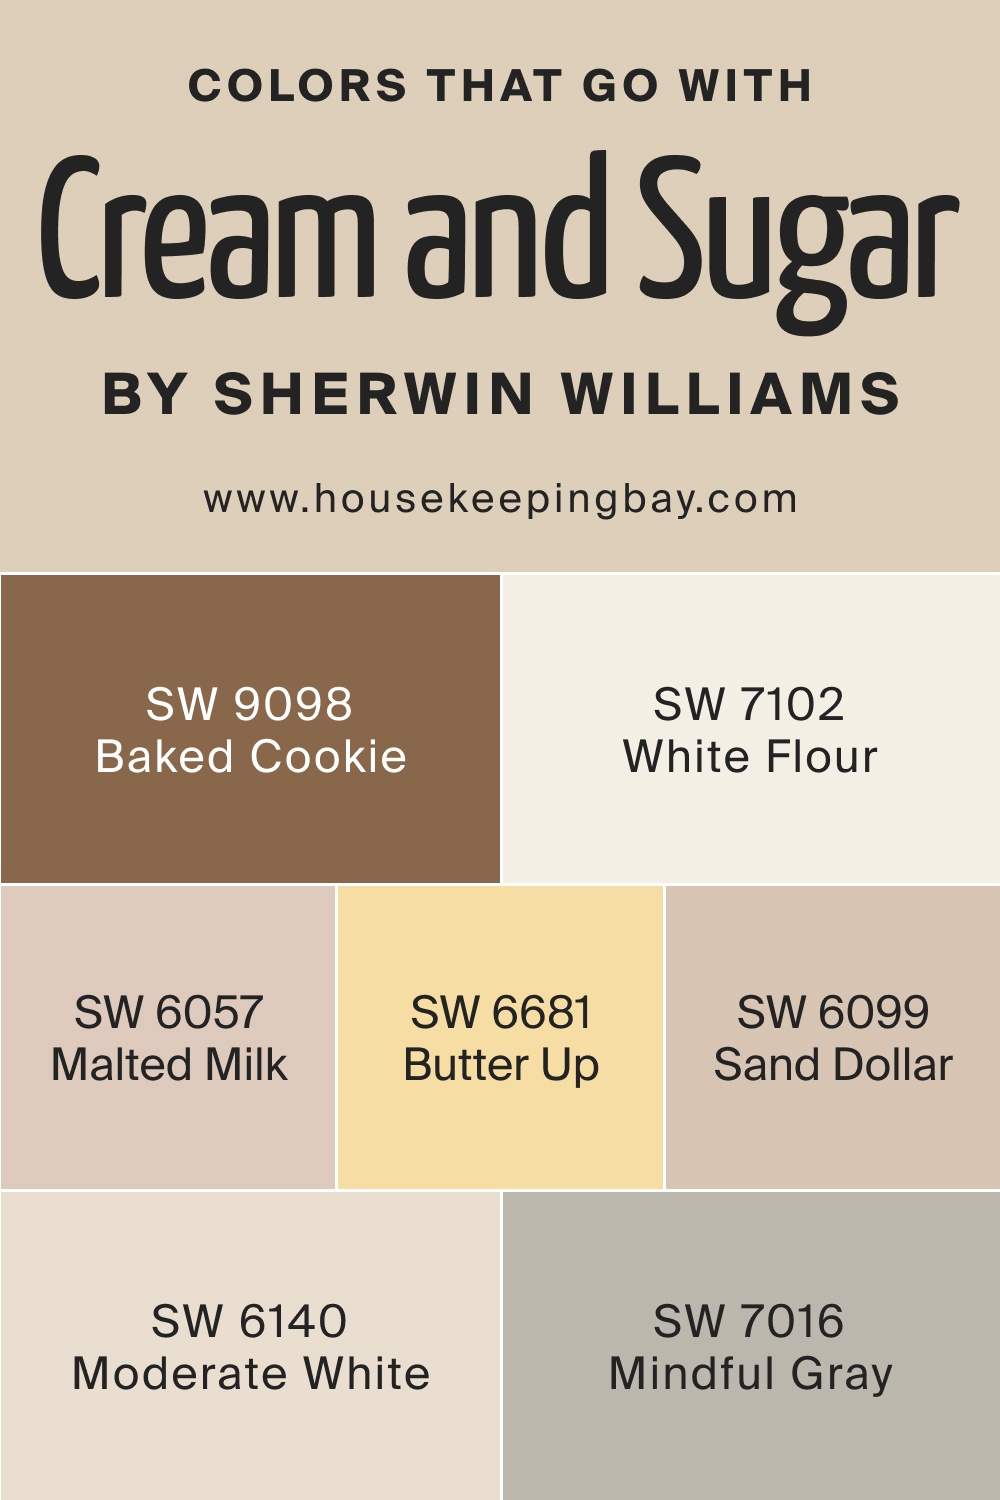 Colors that goes with SW 9507 Cream and Sugar by Sherwin Williams